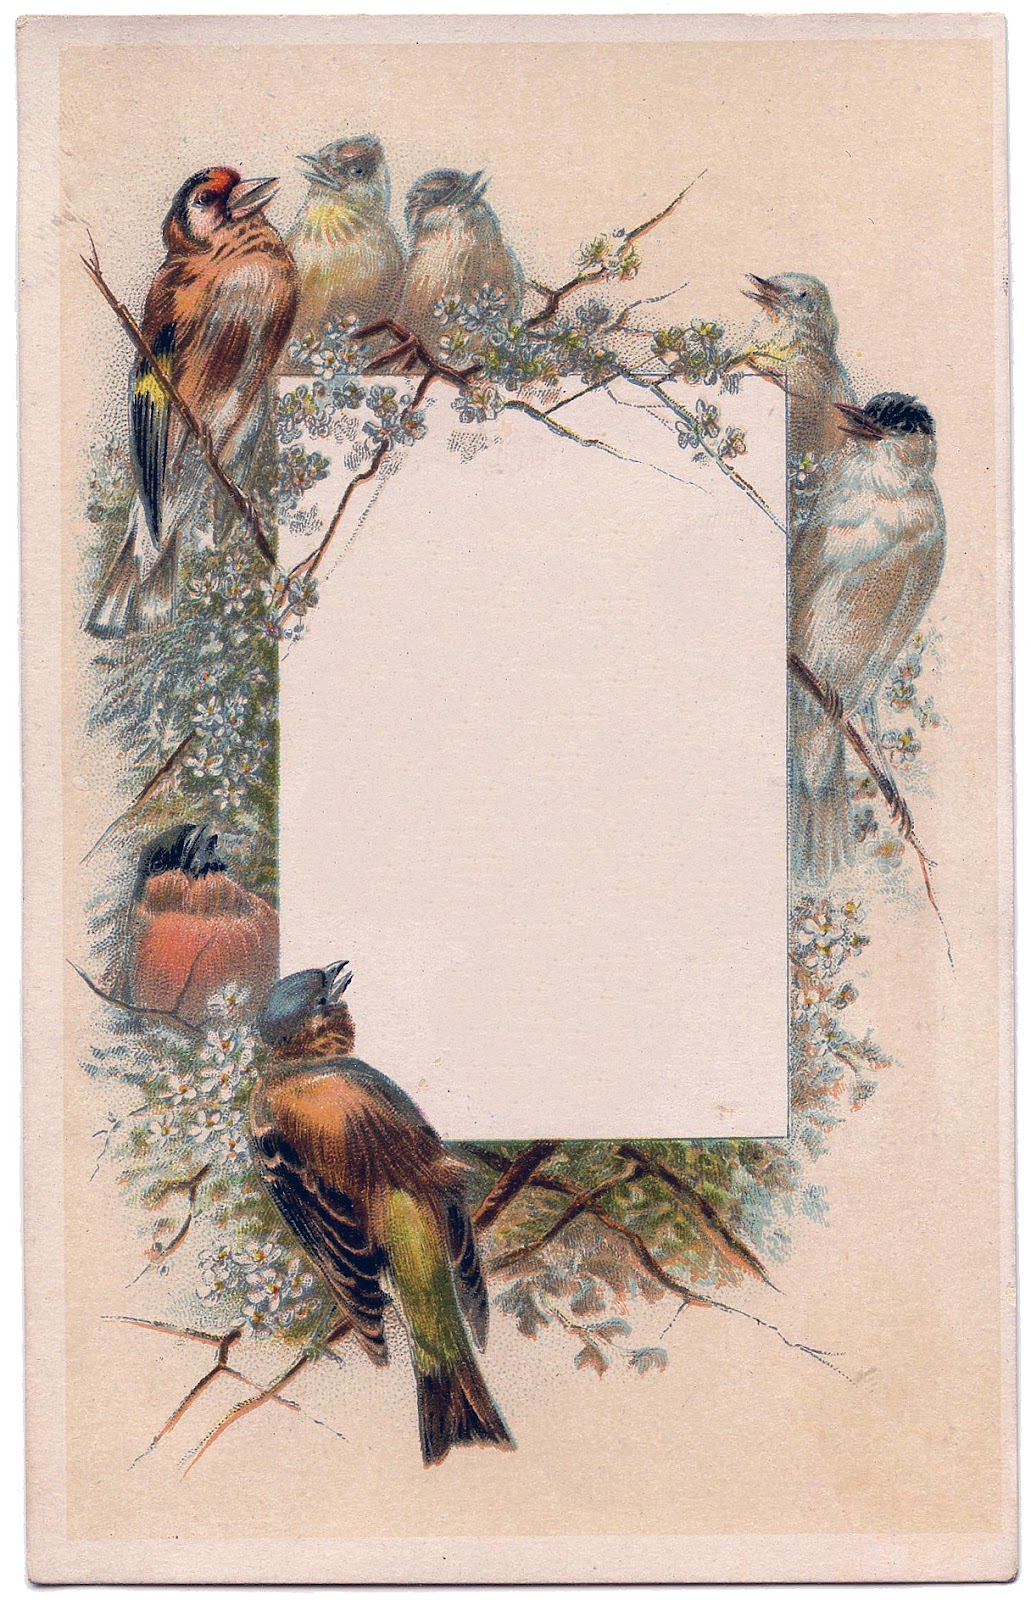 Vintage Frames - Birds and Flowers - The Graphics Fairy